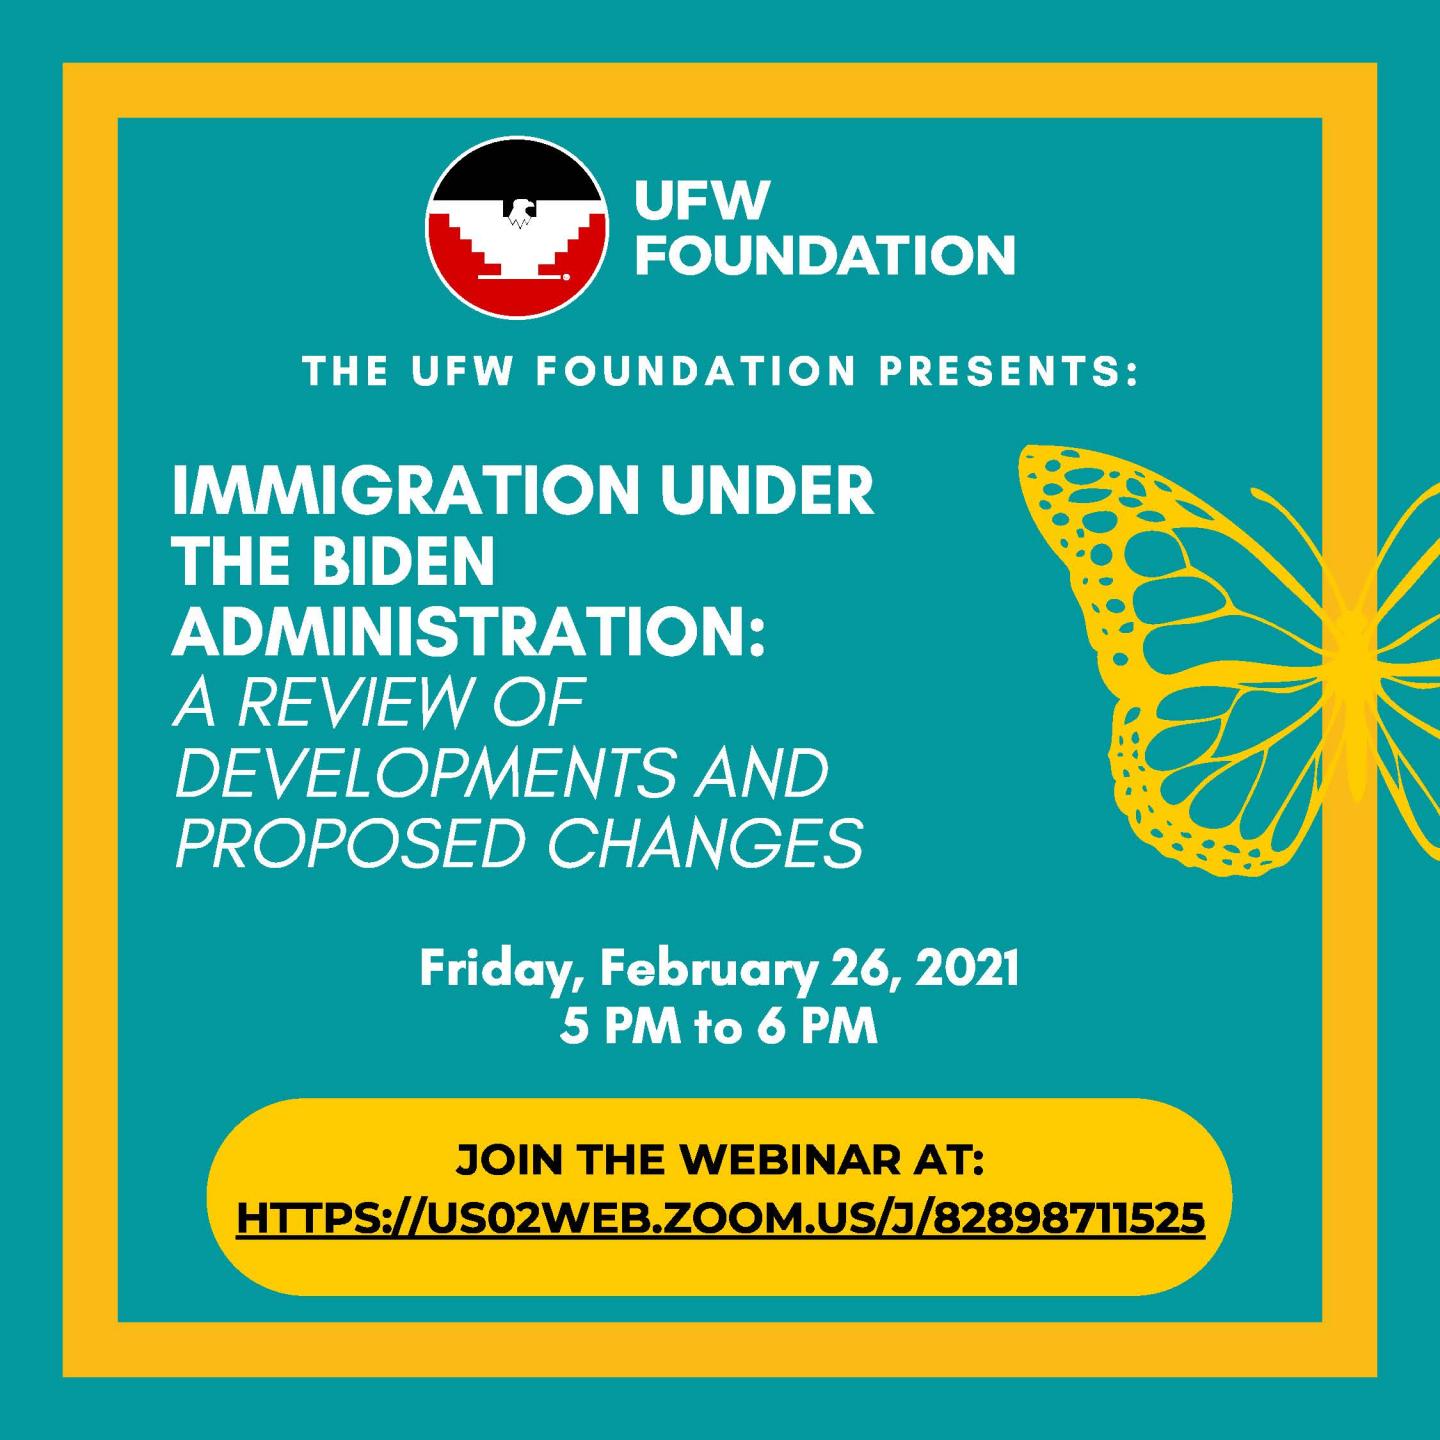 Flyer promoting Immigration Under the Biden Administration on February 26, 2021